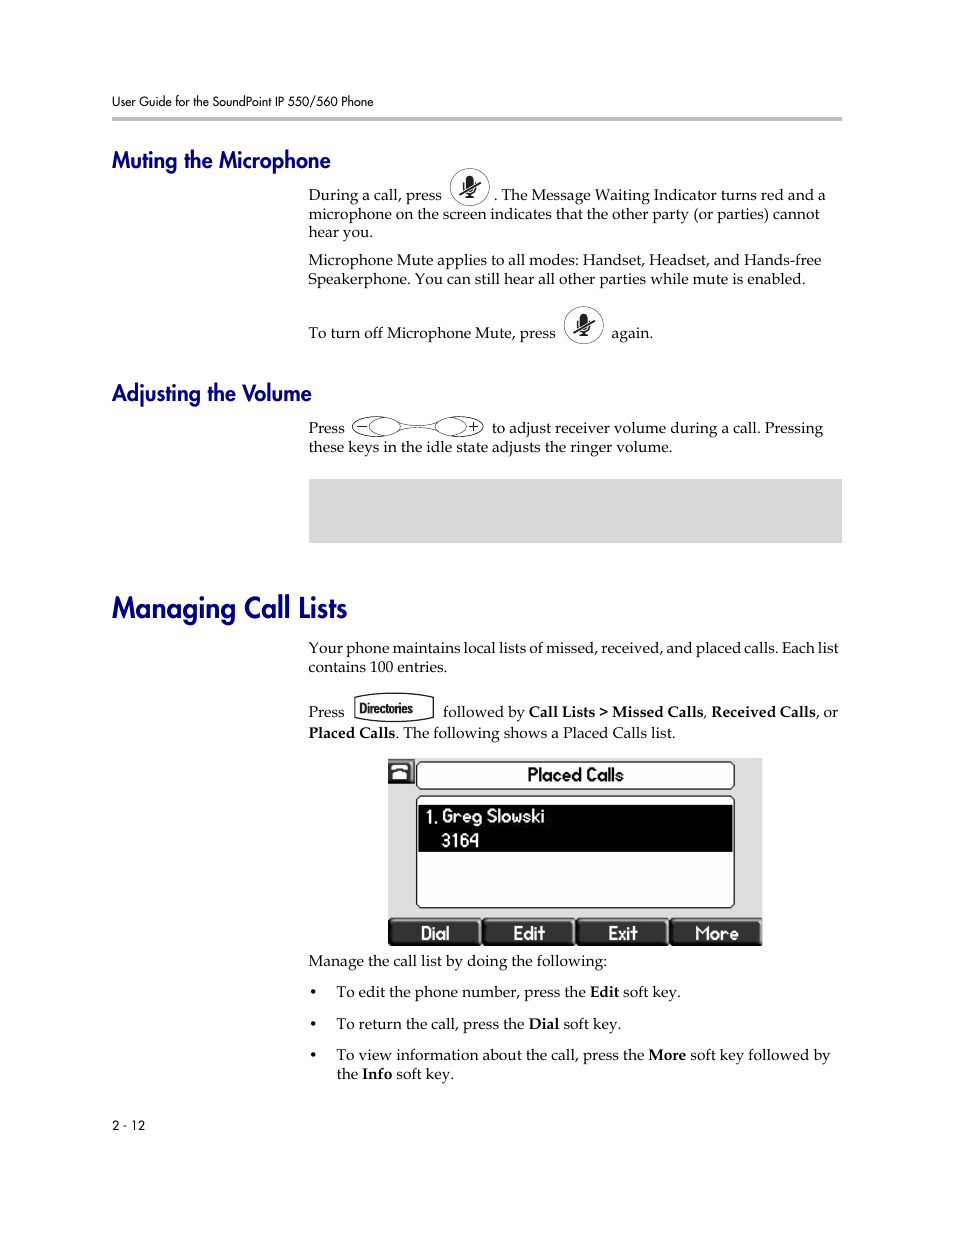 Muting the microphone, Adjusting the volume, Managing call lists | Muting the microphone –12 adjusting the volume –12, Managing call lists –12 | Polycom SoundPoint IP 560 User Manual | Page 36 / 108